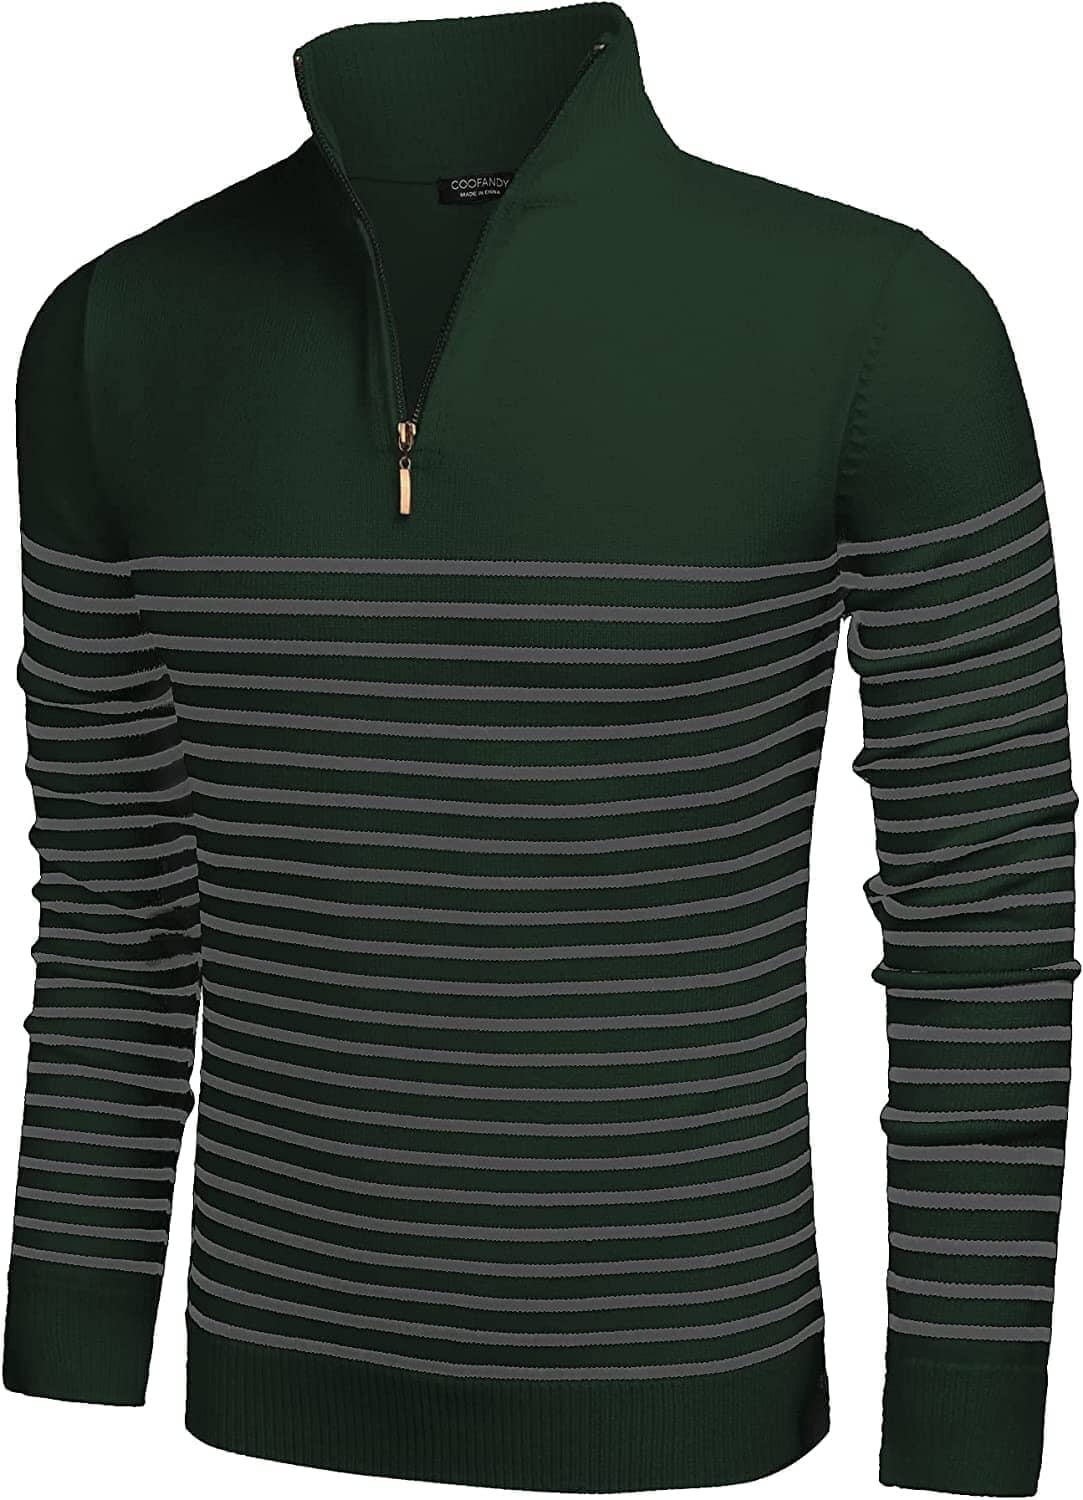 Striped Zip Up Mock Neck Pullover Sweaters (US Only) Sweaters COOFANDY Store Dark Green S 